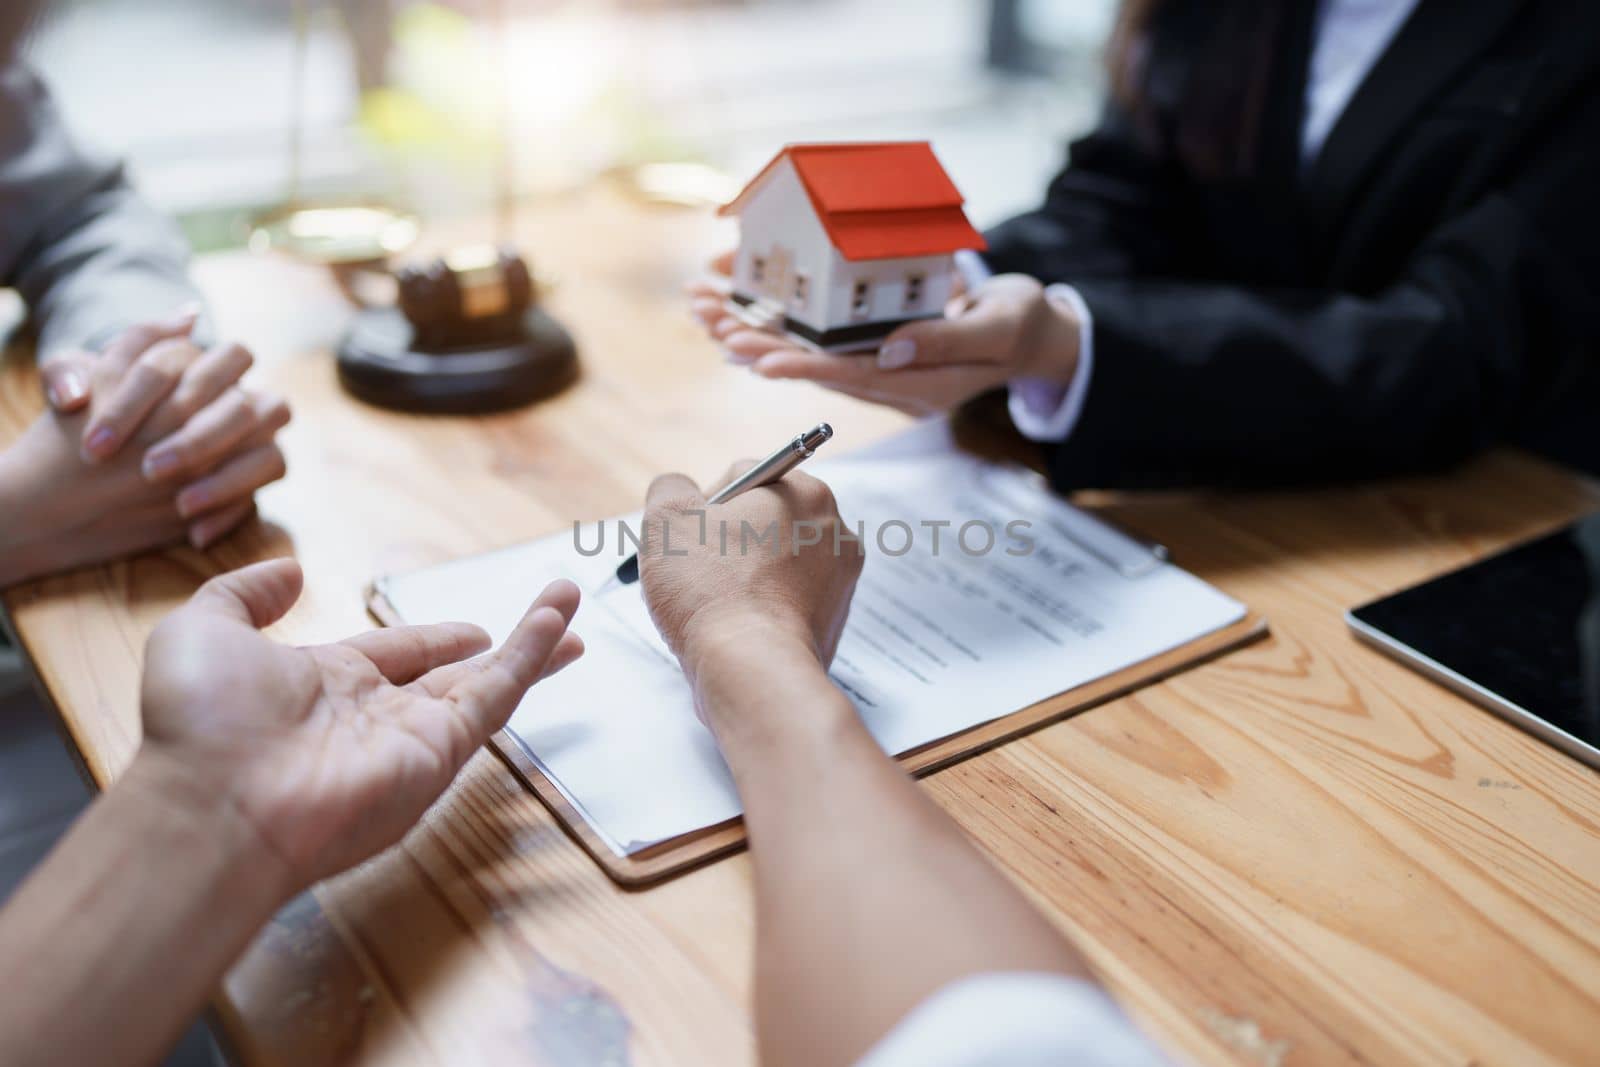 Guarantee, mortgage, agreement, contract, sign, real estate agent delivers the house to the customer after signing important contract documents.